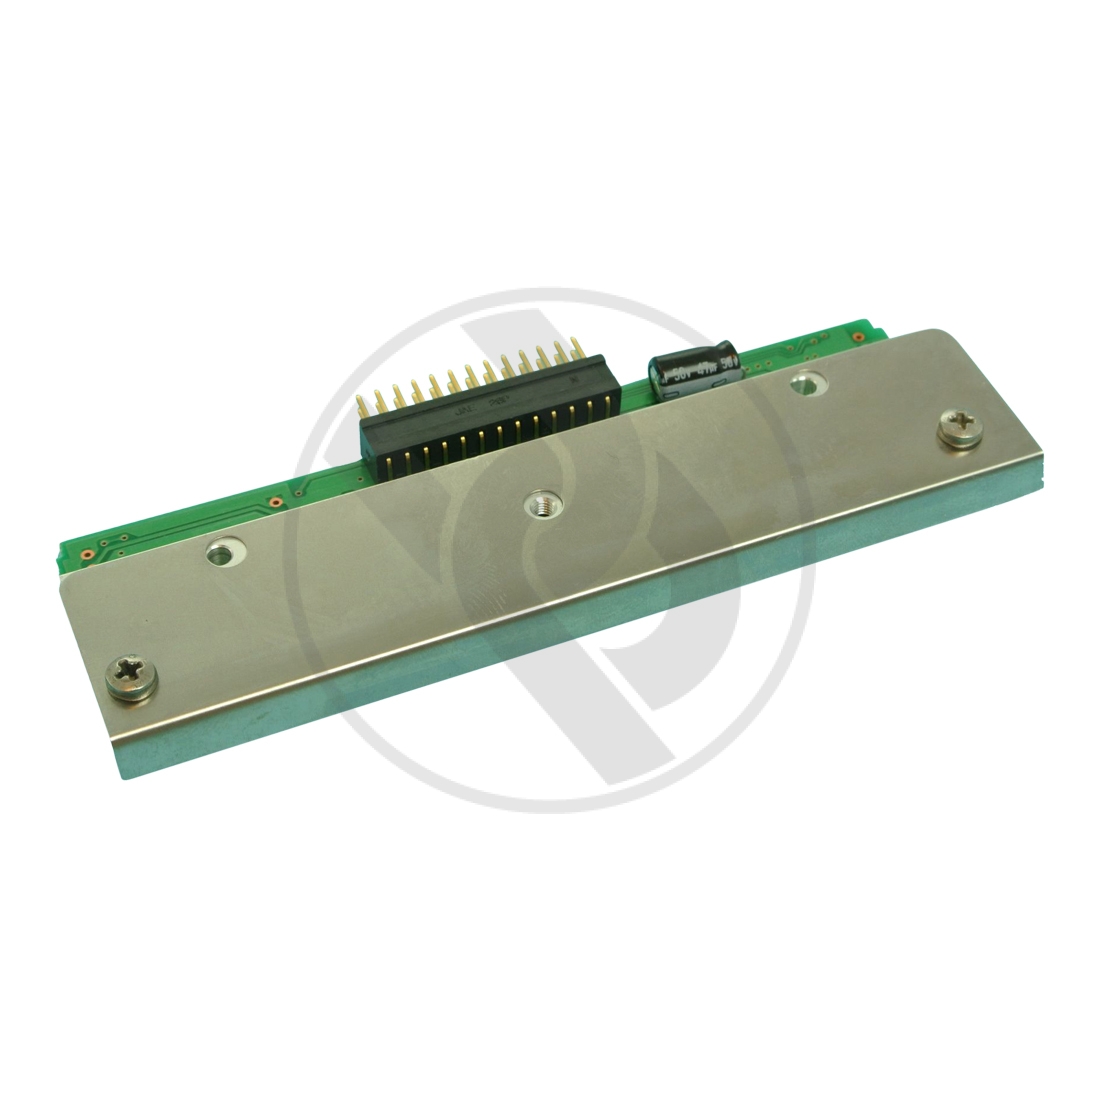 Thermal printhead, 532581, for Imaje-Markpoint 532581